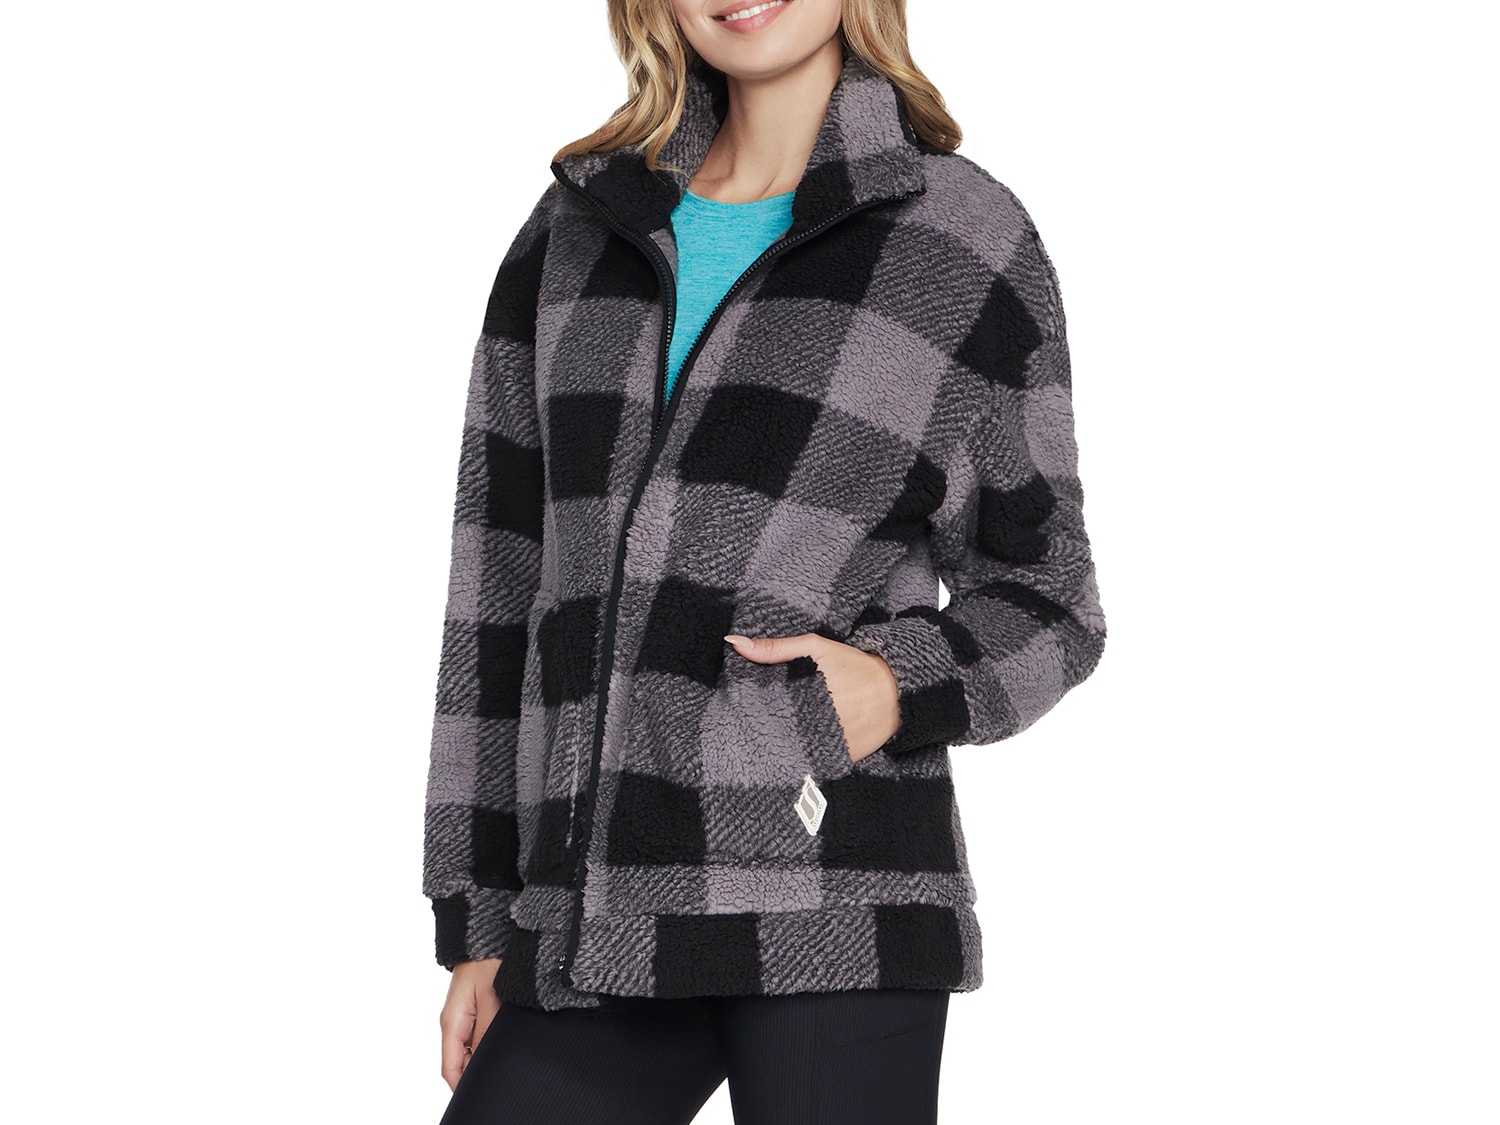 Clothing & Shoes - Jackets & Coats - Lightweight Jackets - Skechers  Skechcloud Winter Bloom Jacket - Online Shopping for Canadians